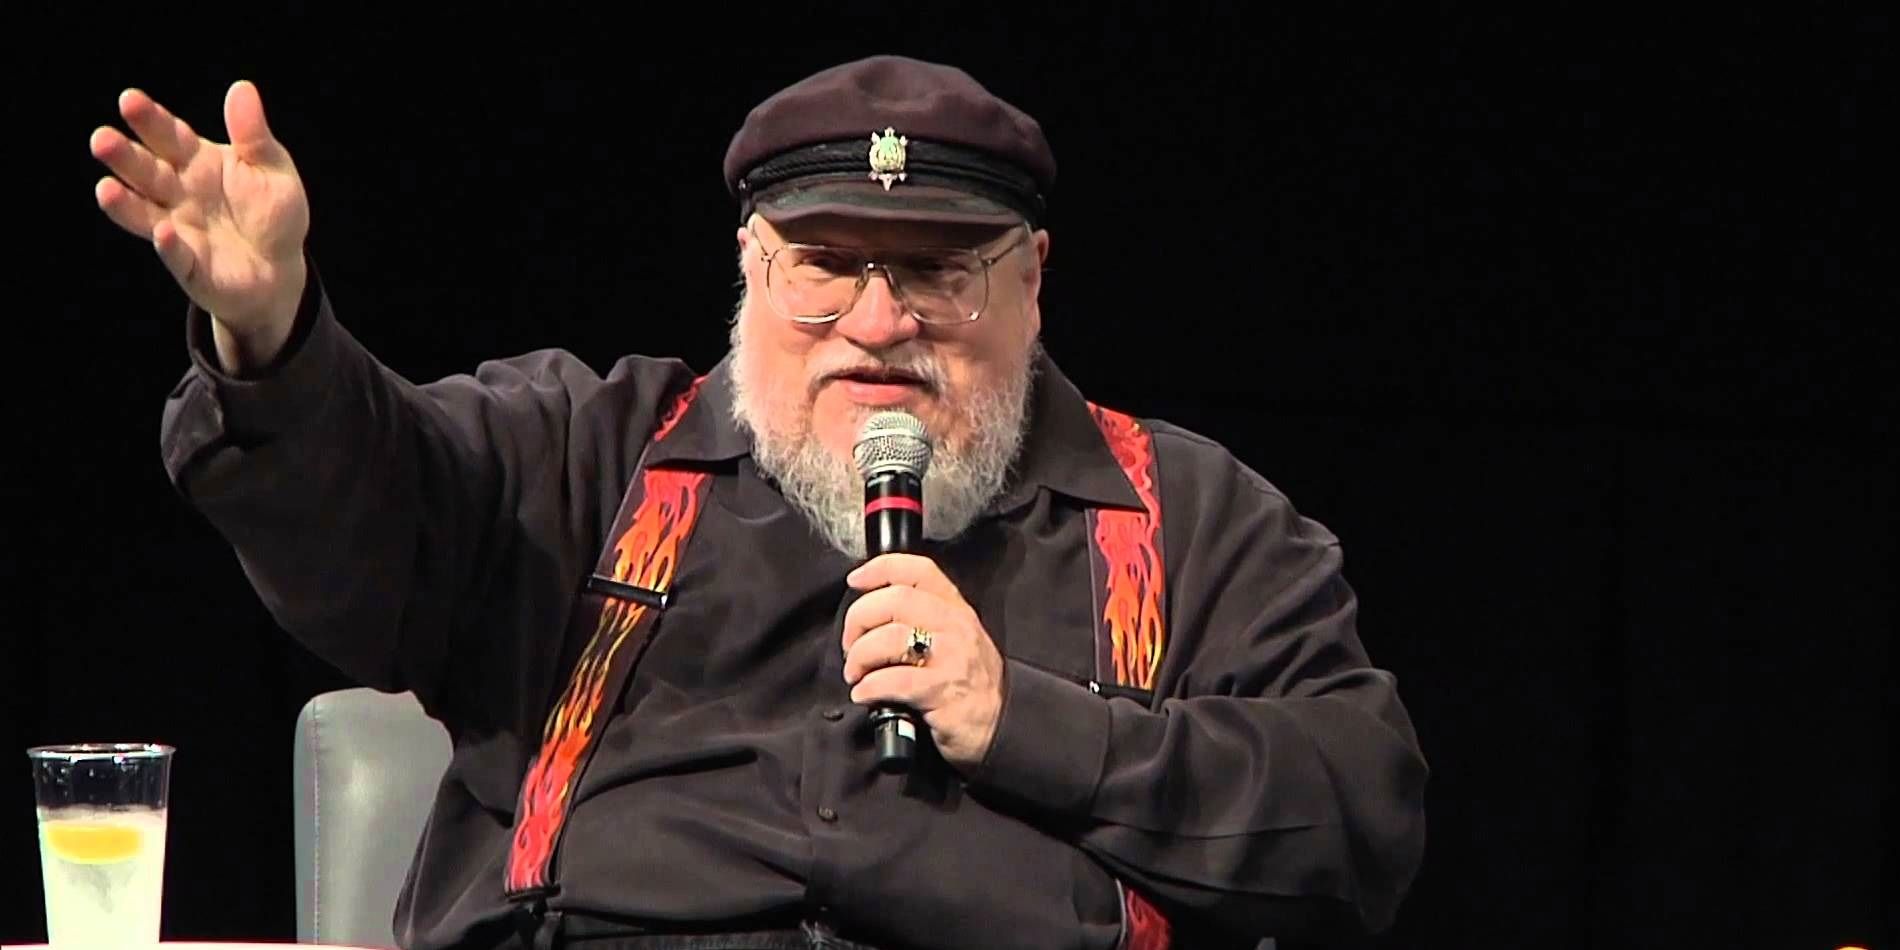 George R. R. Martin, the author of A Song of Ice and Fire, at a speaking event talking about his books and Game of Thrones